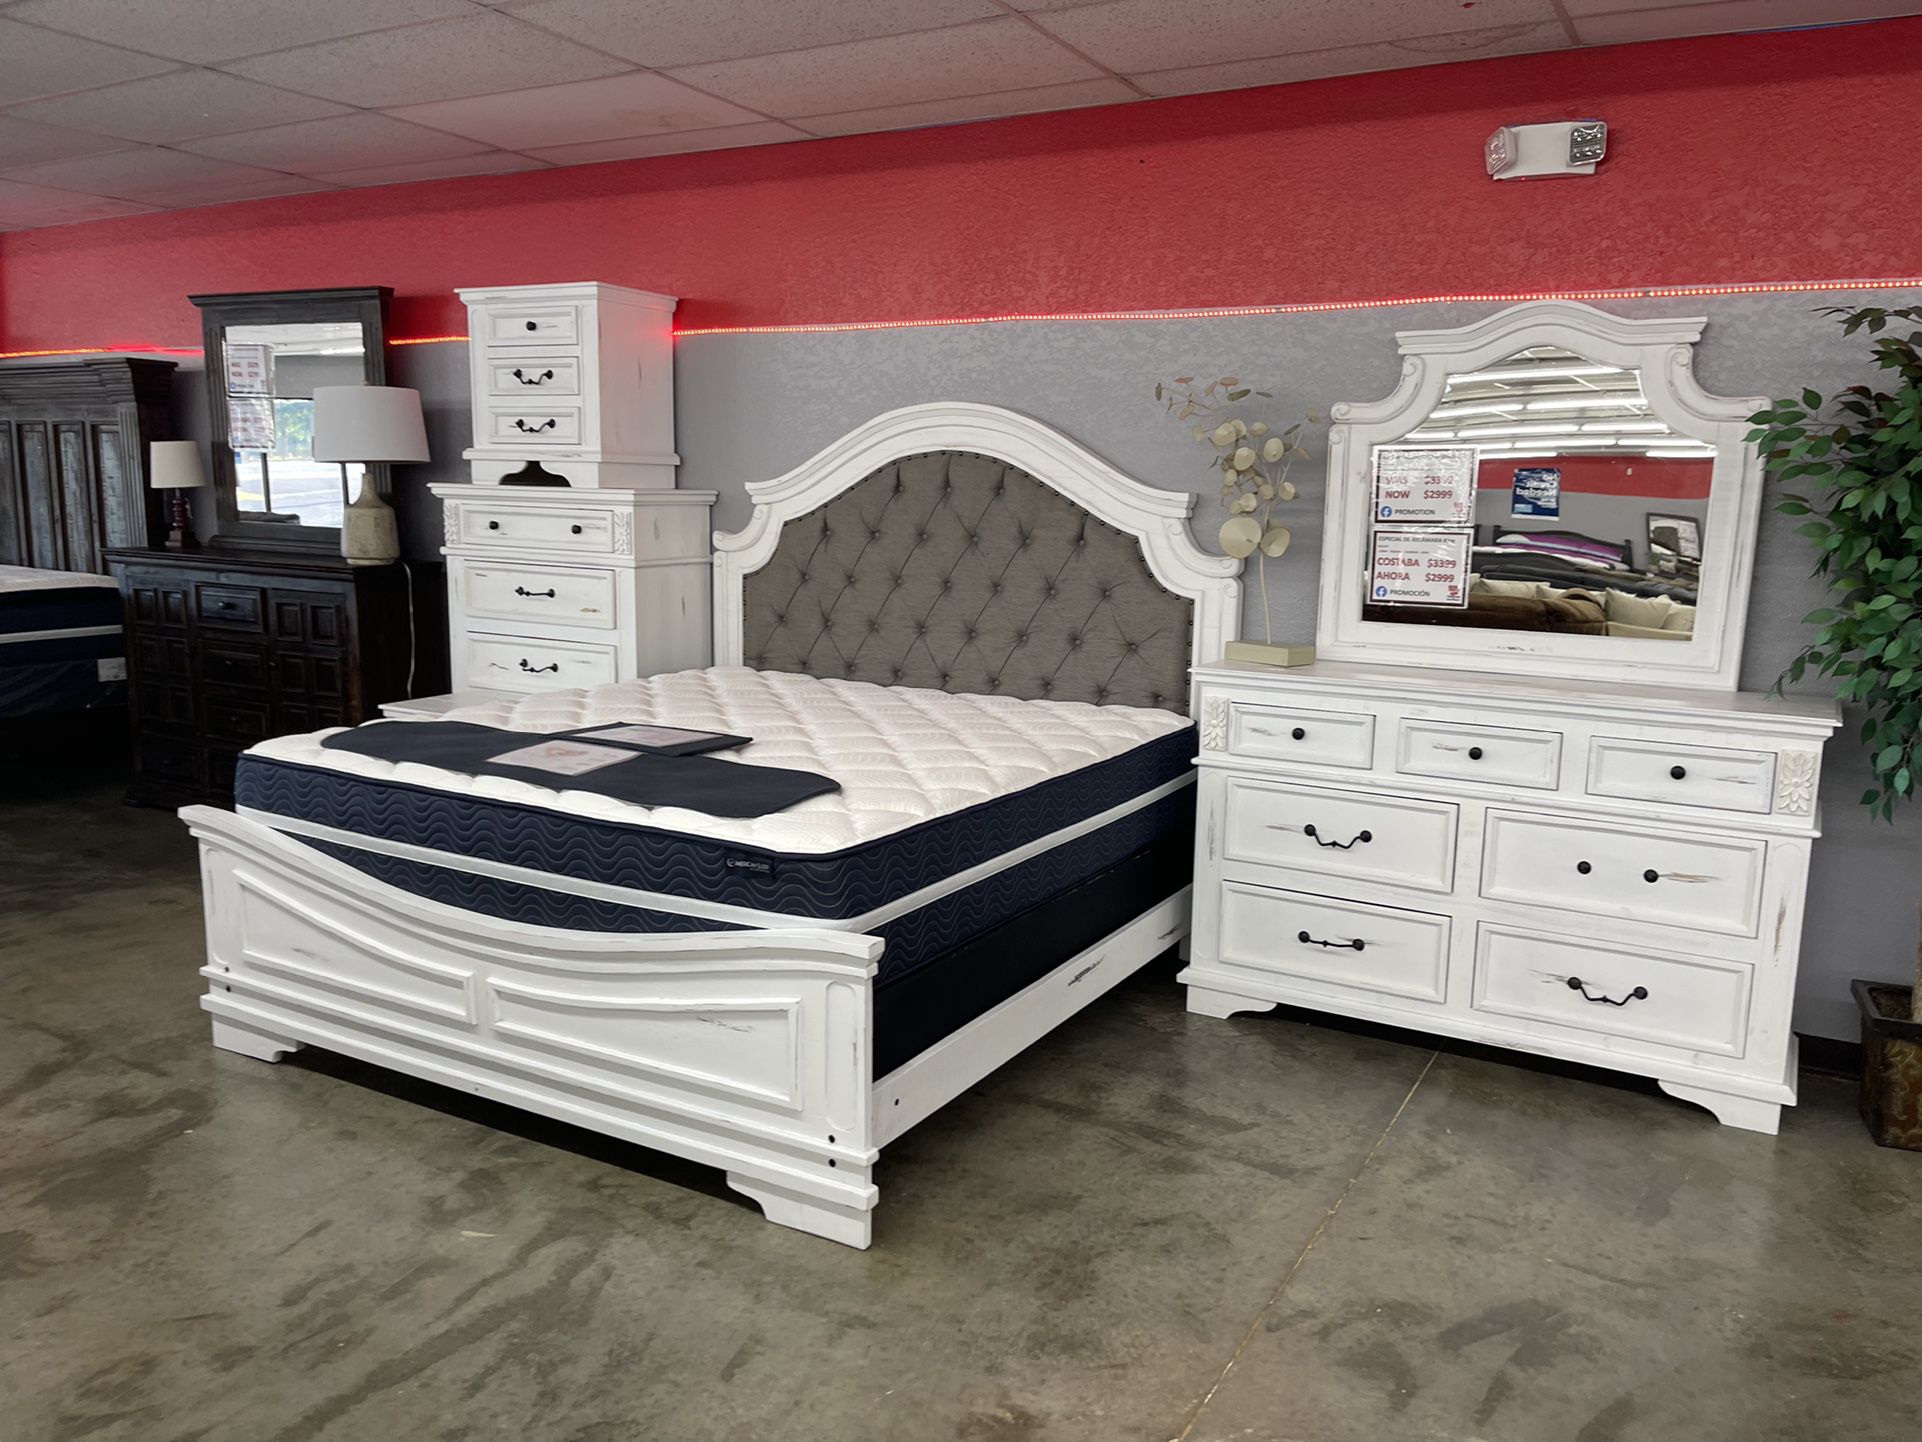 All New King Rustic Bedroom Group On Sale Now !!